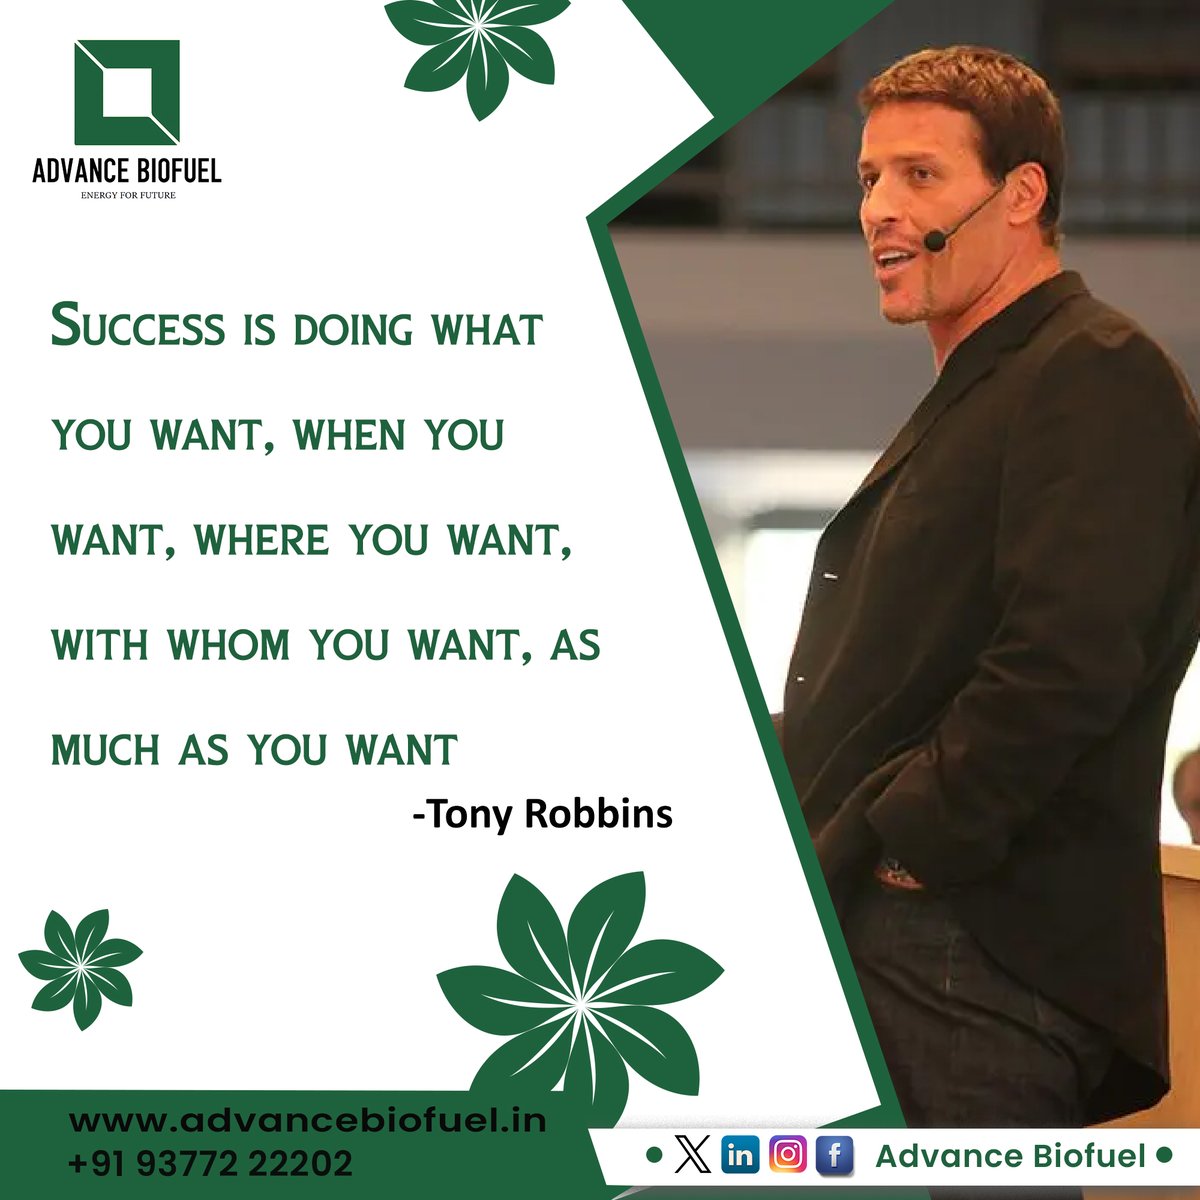 Success is doing what you want, when you want, where you want, with whom you want, as much as you want.

#AdvancedBiofuel #SuccessMindset #FreedomGoals #AchieveYourDreams #LiveLifeOnYourTerms #SuccessQuotes #DreamBig #EmpowerYourself #PersonalFreedom #SuccessJourney